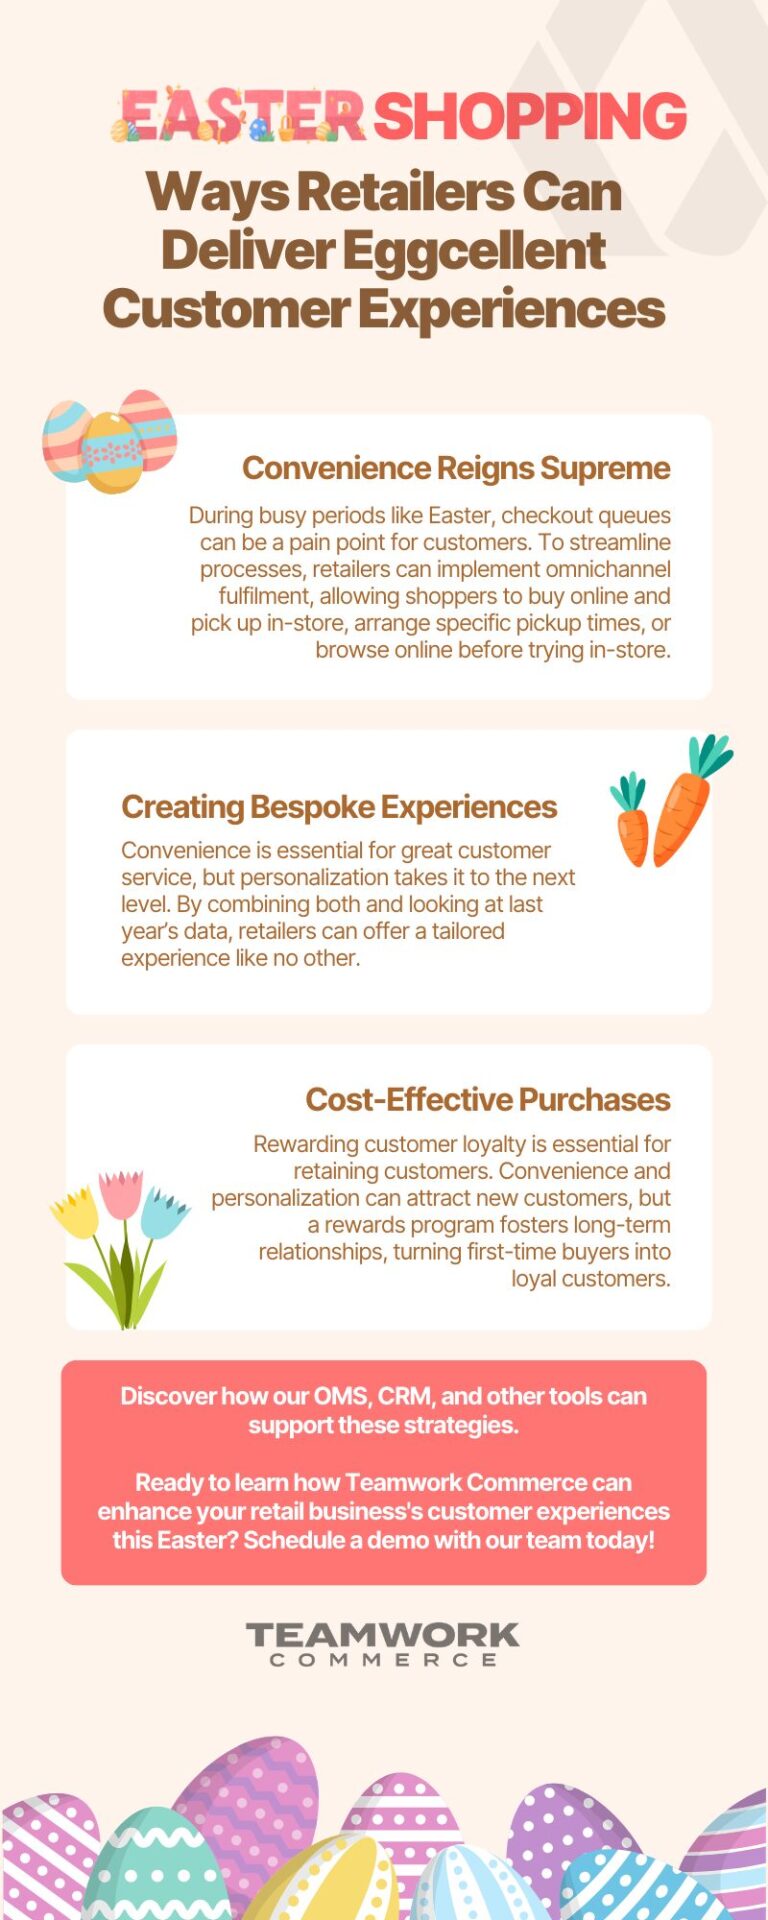 Infographic: Easter Shopping: 3 Ways Retailers Can Deliver Eggcellent Customer Experiences 